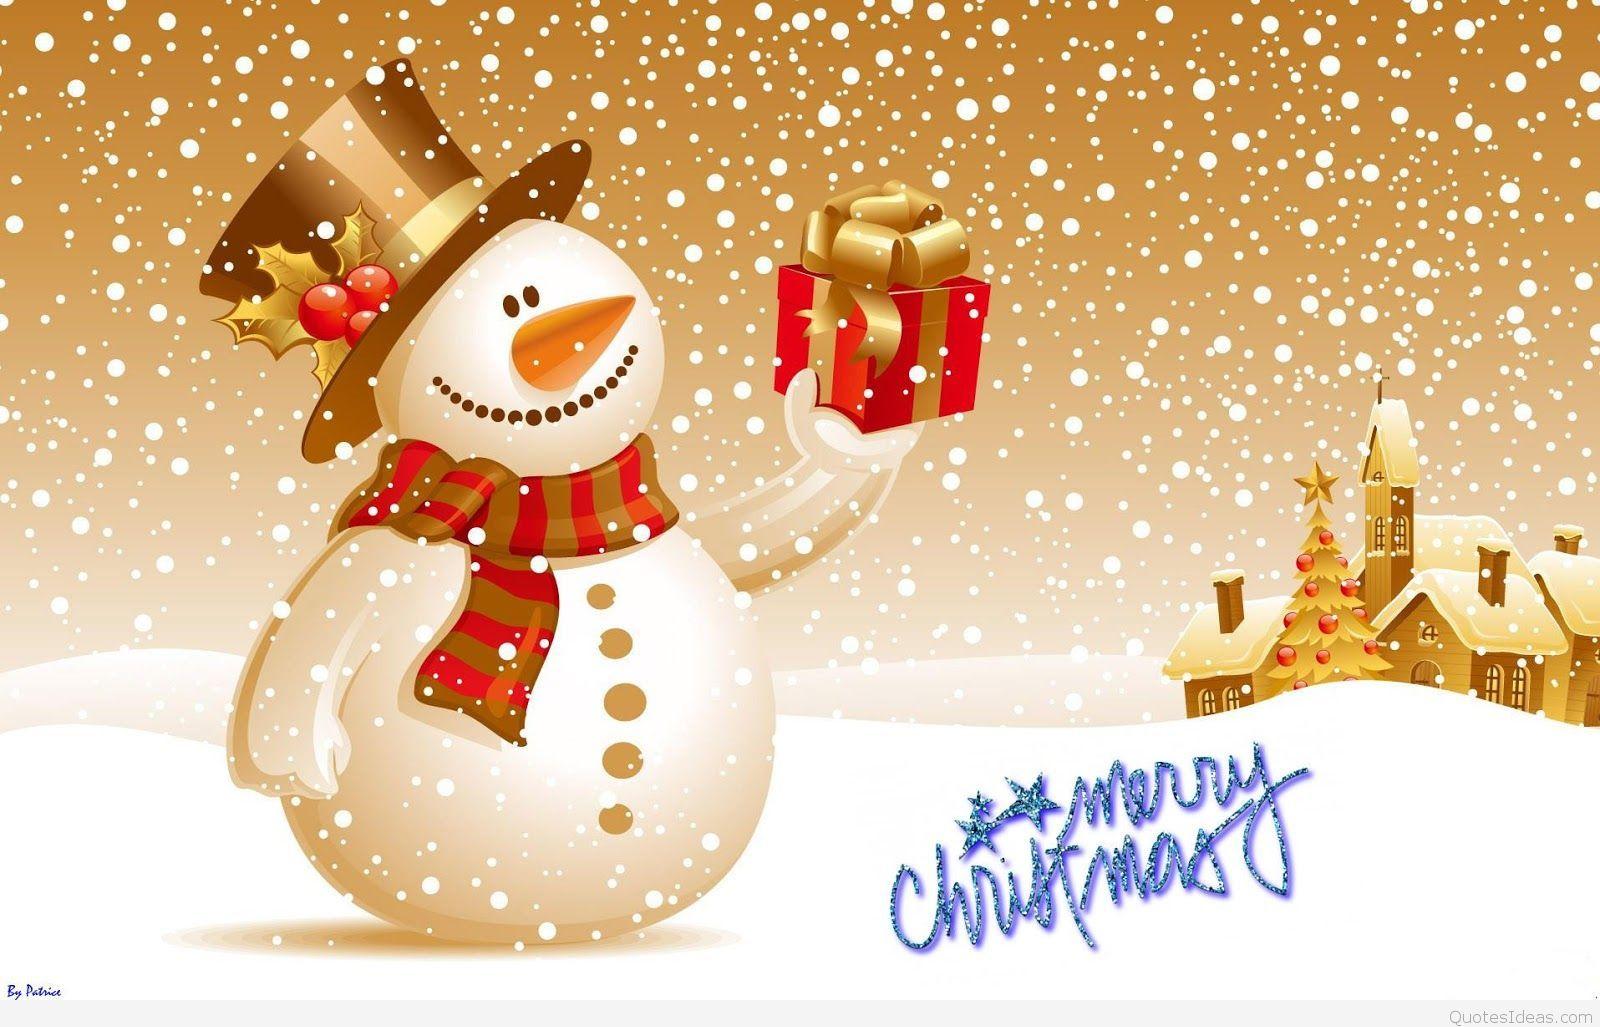 Funny Christmas Winter Snowman Quotes, Pics, Greetings 2015